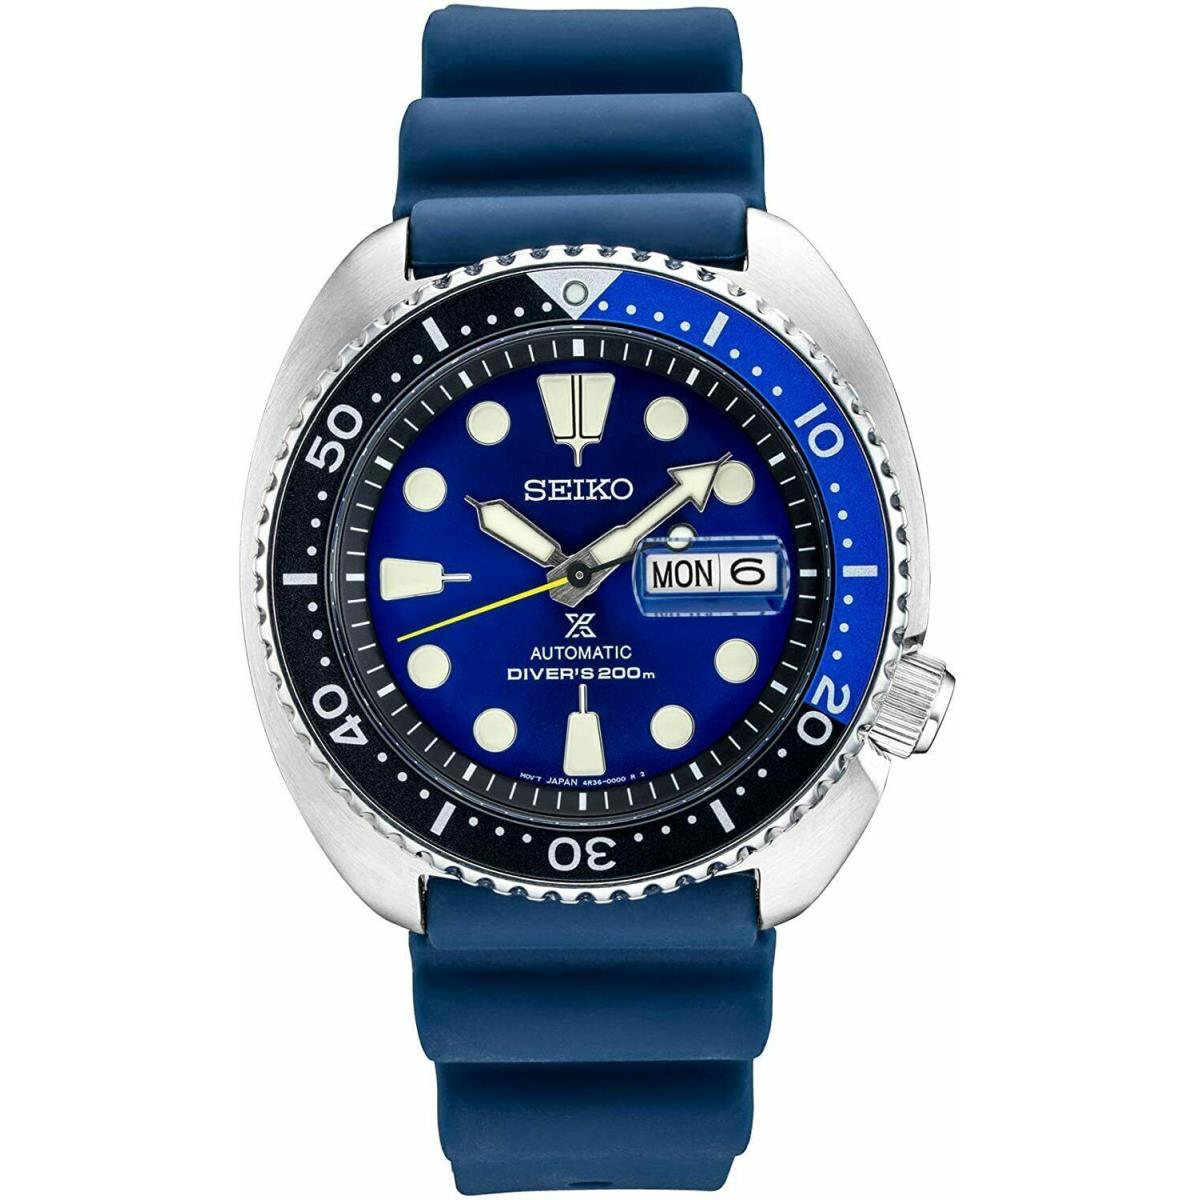 Seiko Men`s Prospex Automatic Diver s Blue Silicone Strap Day/date Watch SRPD43 - Blue Dial